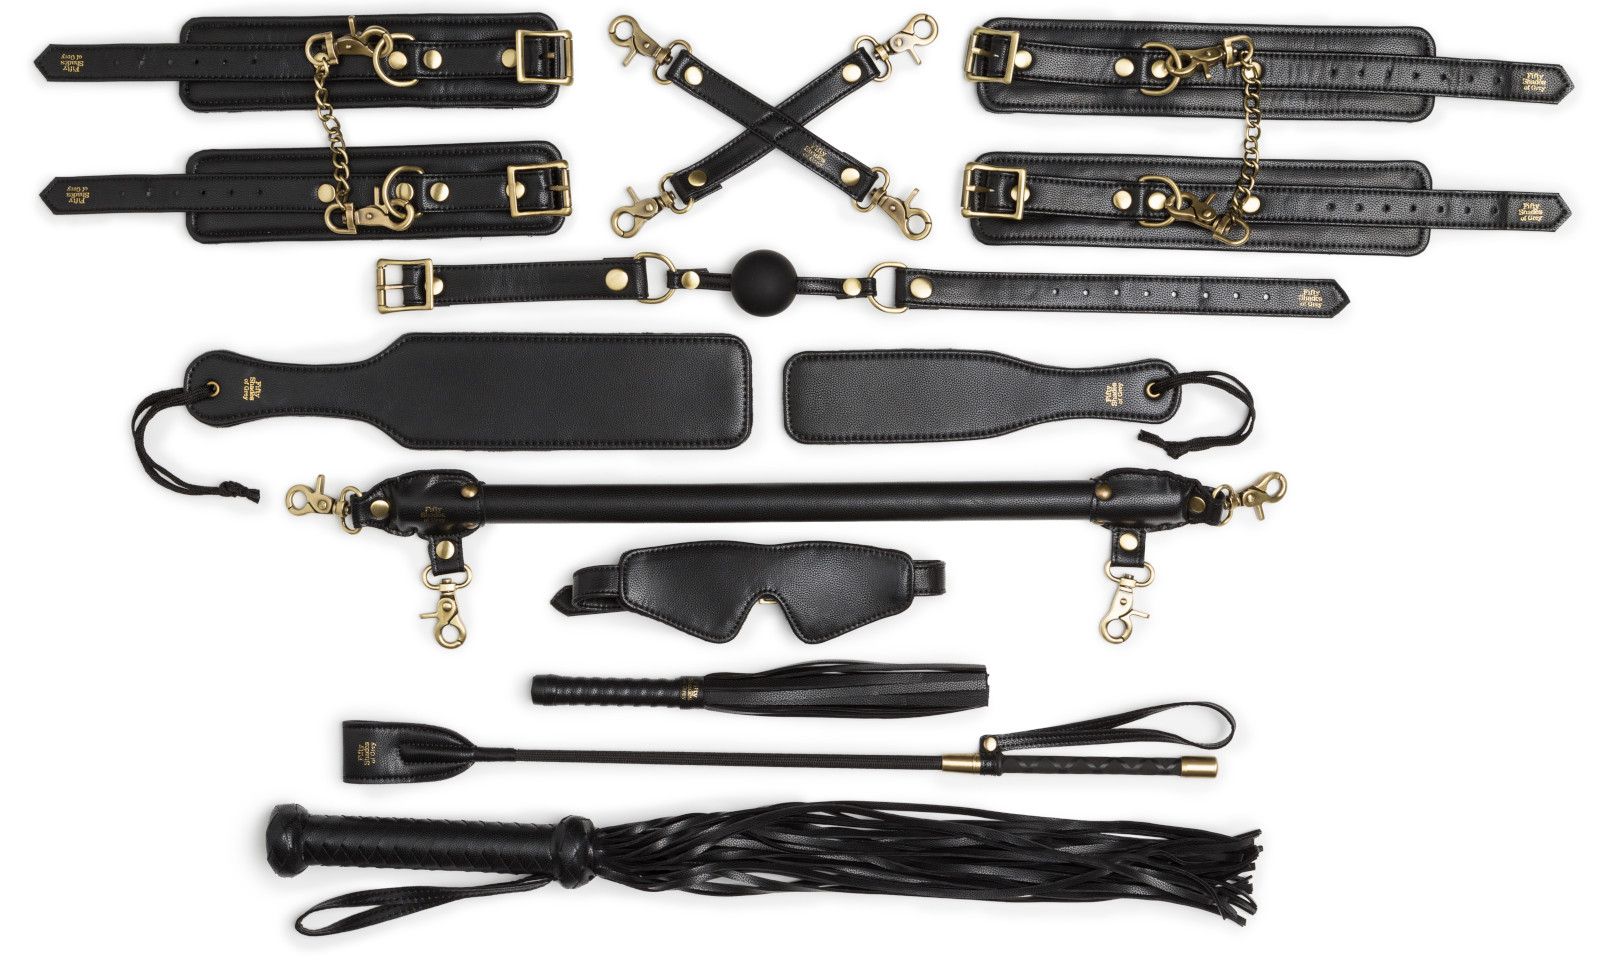 Lovehoney Launches Fifty Shades of Grey Bondage Collection